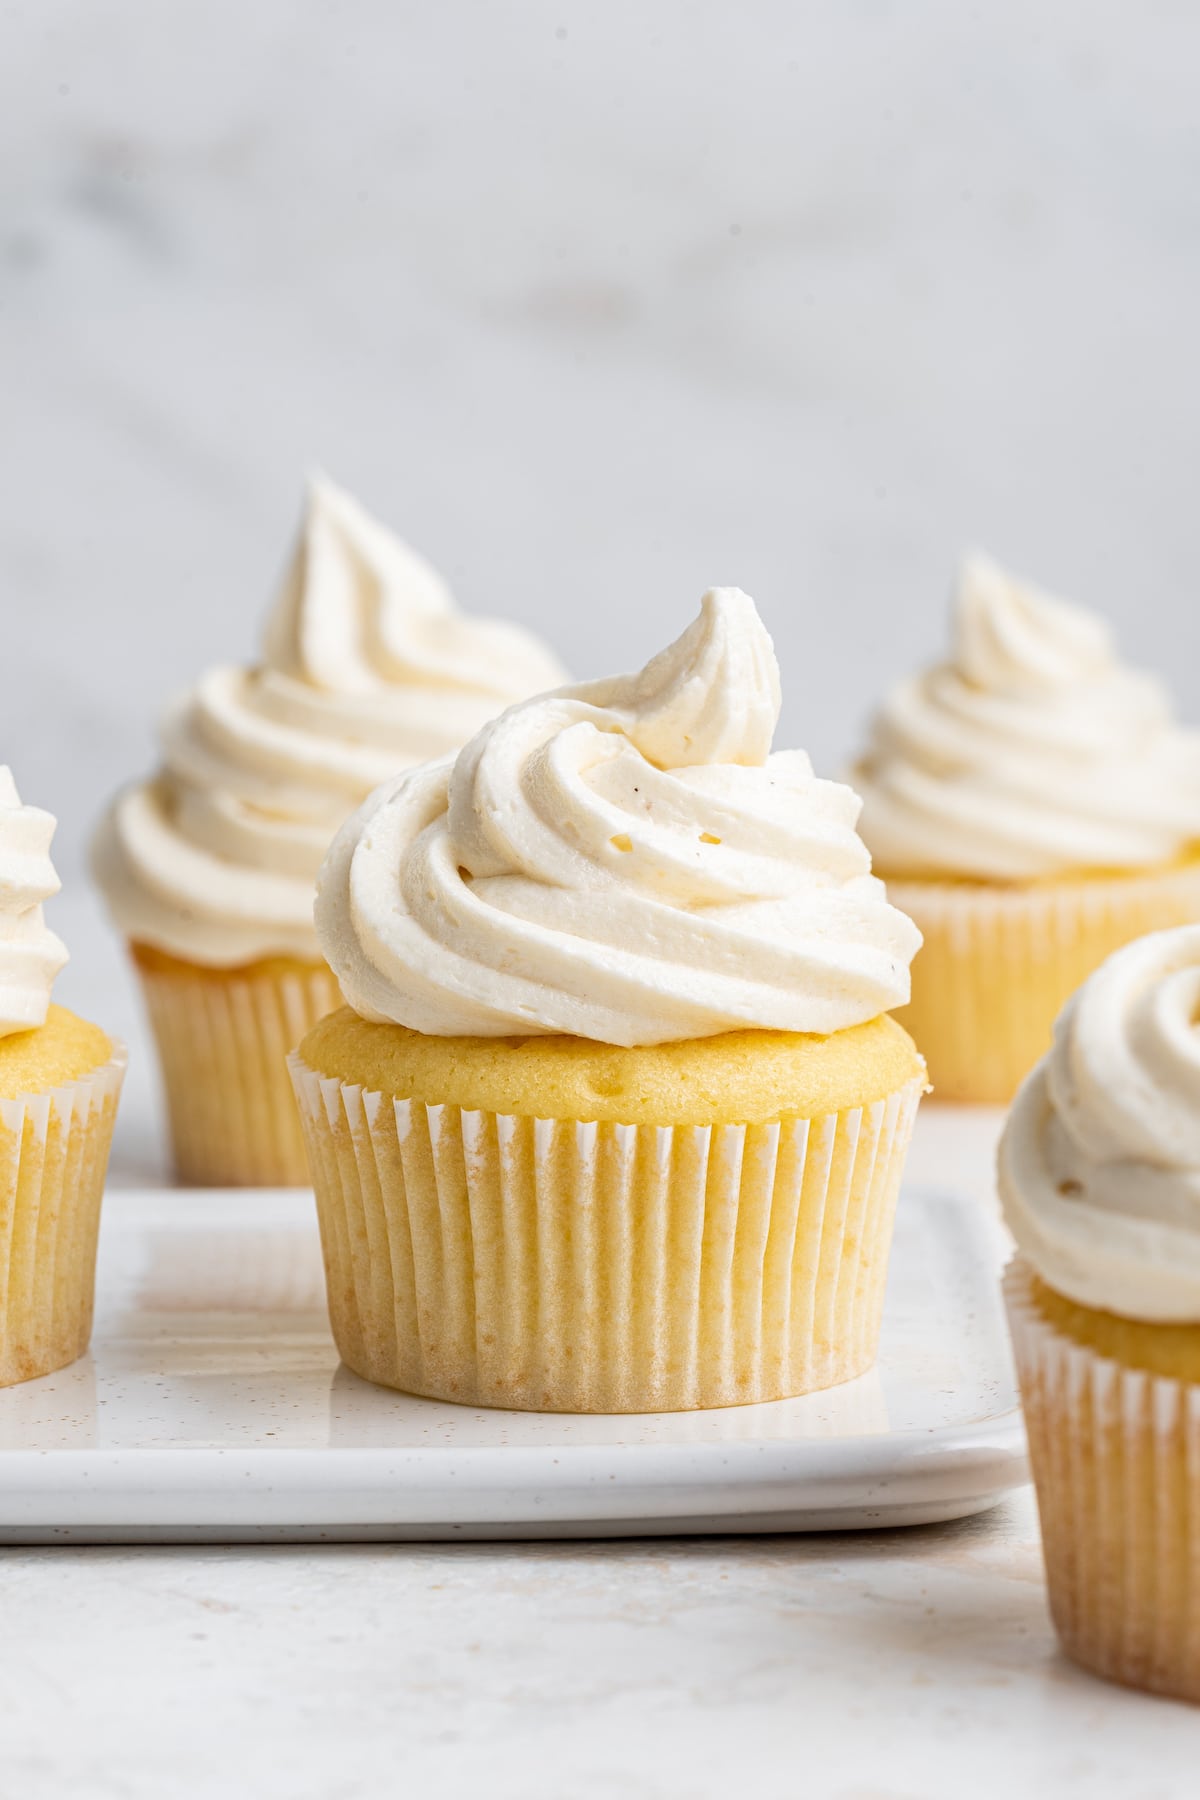 Multiple cupcakes with vanilla buttercream frosting.